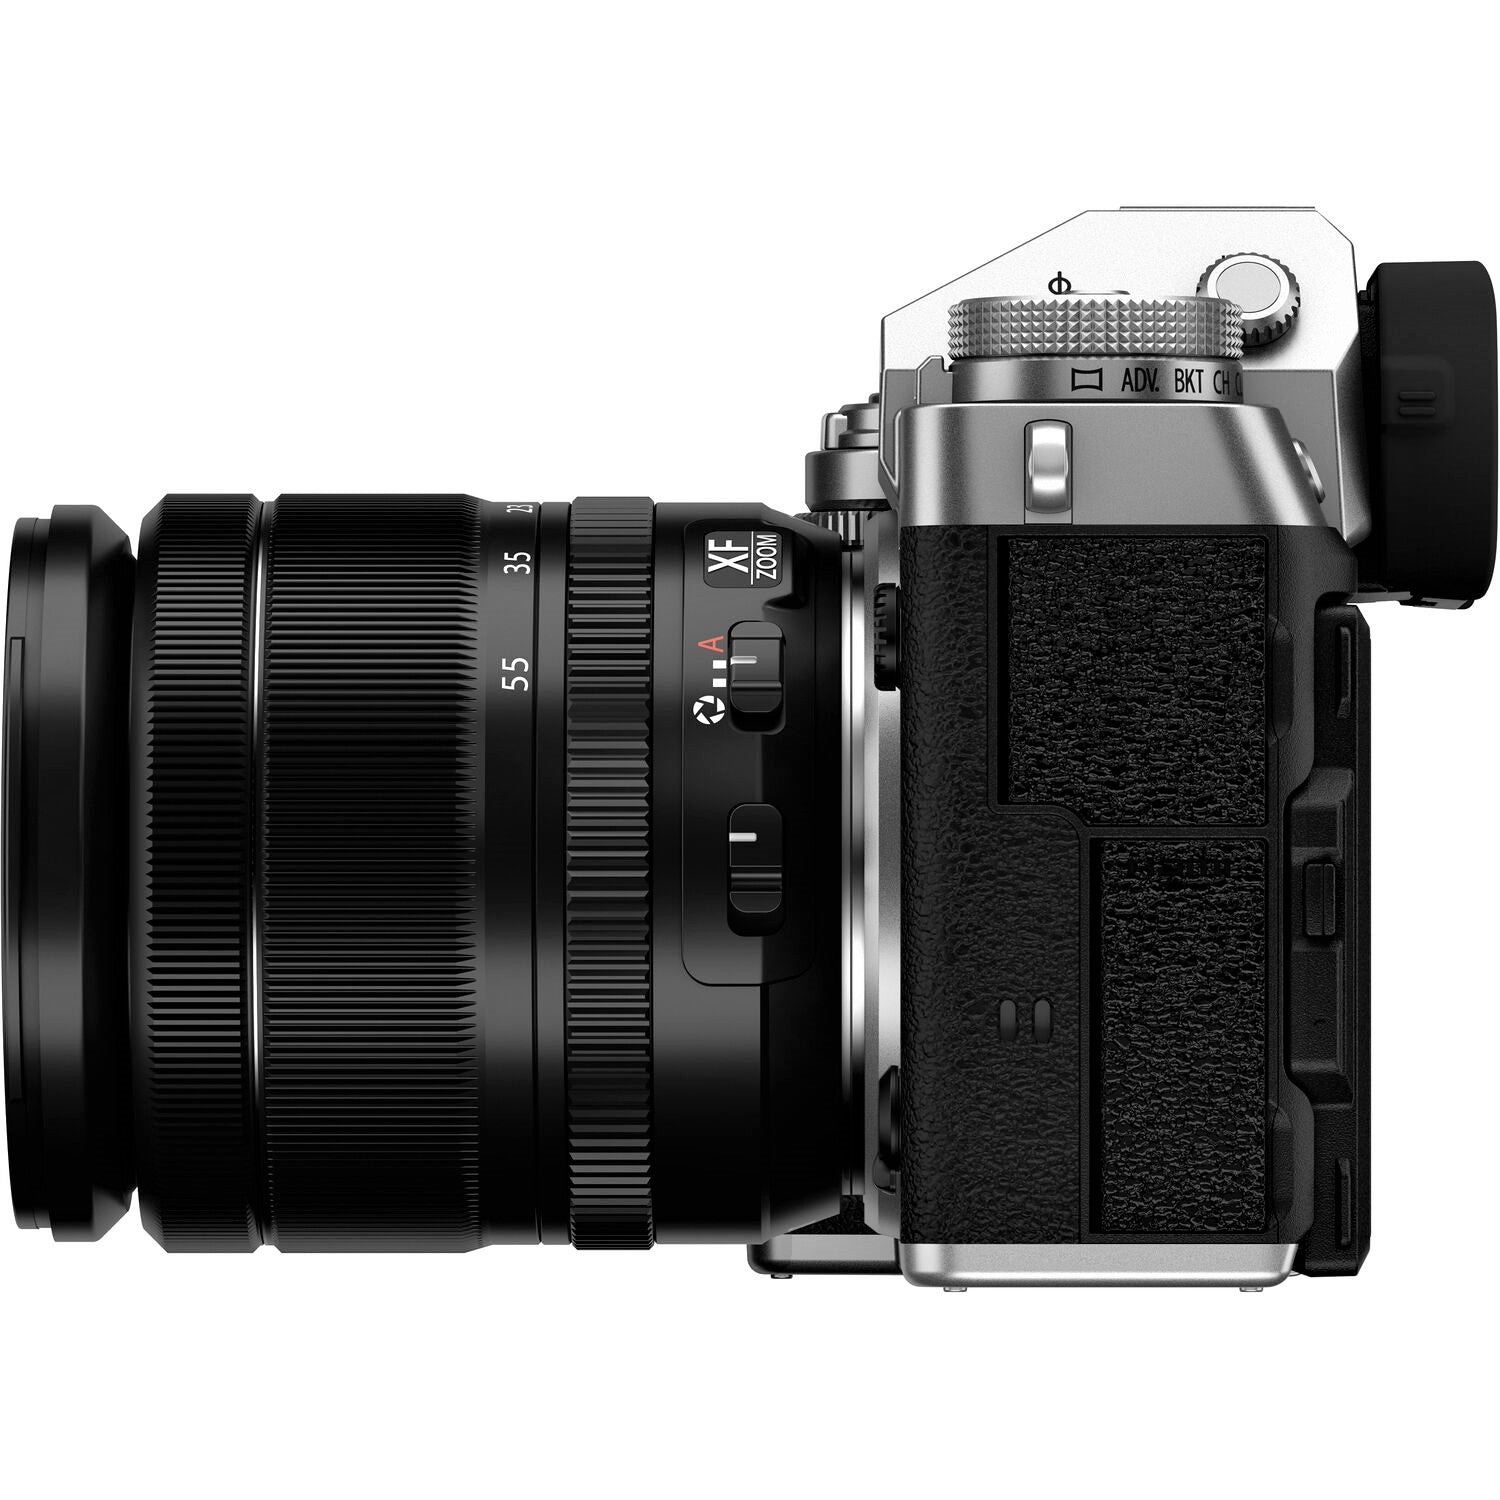 Fujifilm X-T5 Mirrorless Camera with 18-55mm Lens (Silver) - Side View